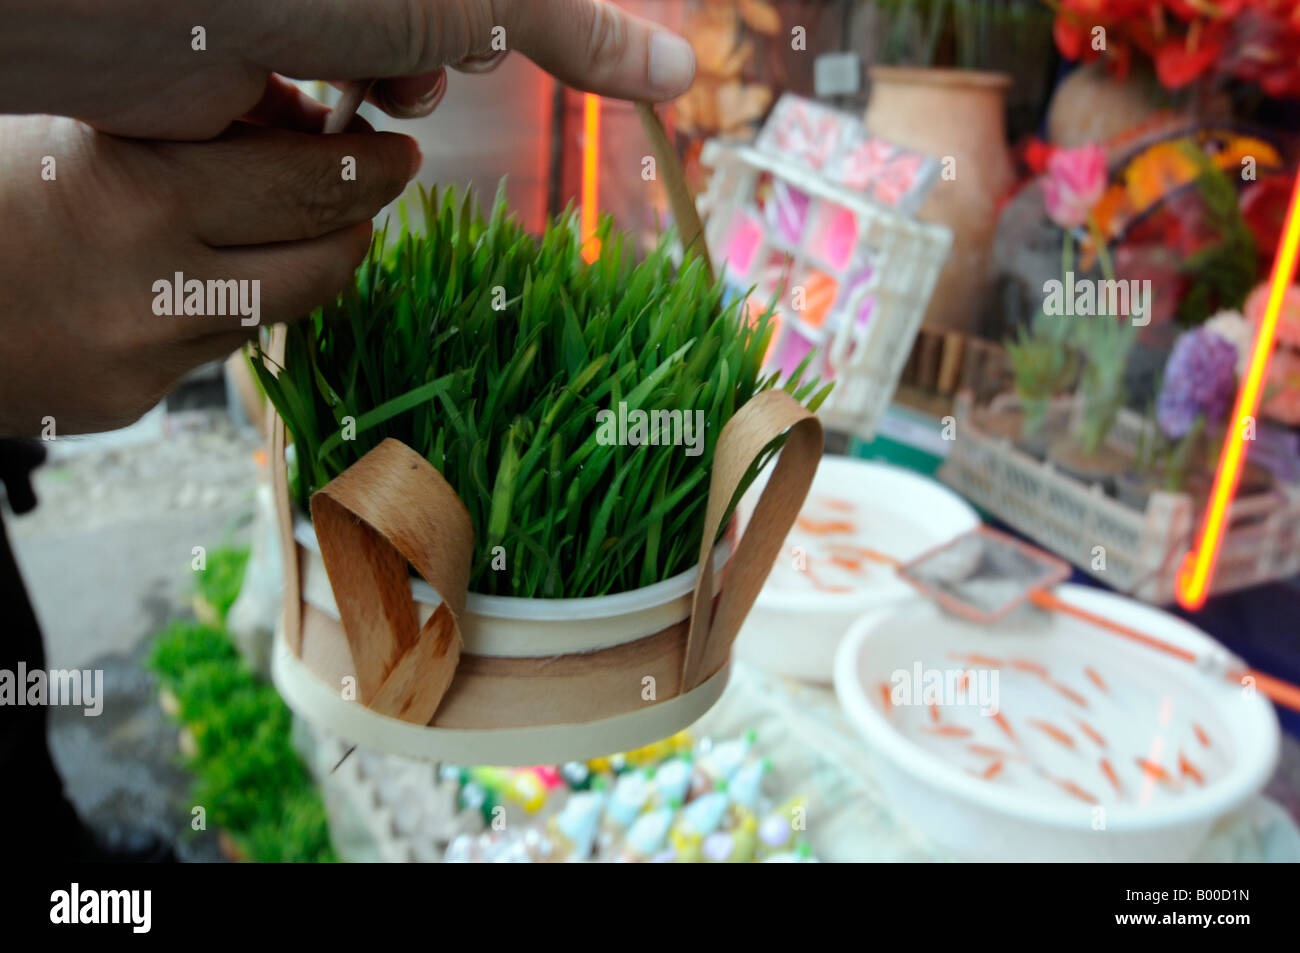 A green plant on sale, a popular gift during the Iranian new year celebration. Photo taken in Tehran, Iran Stock Photo